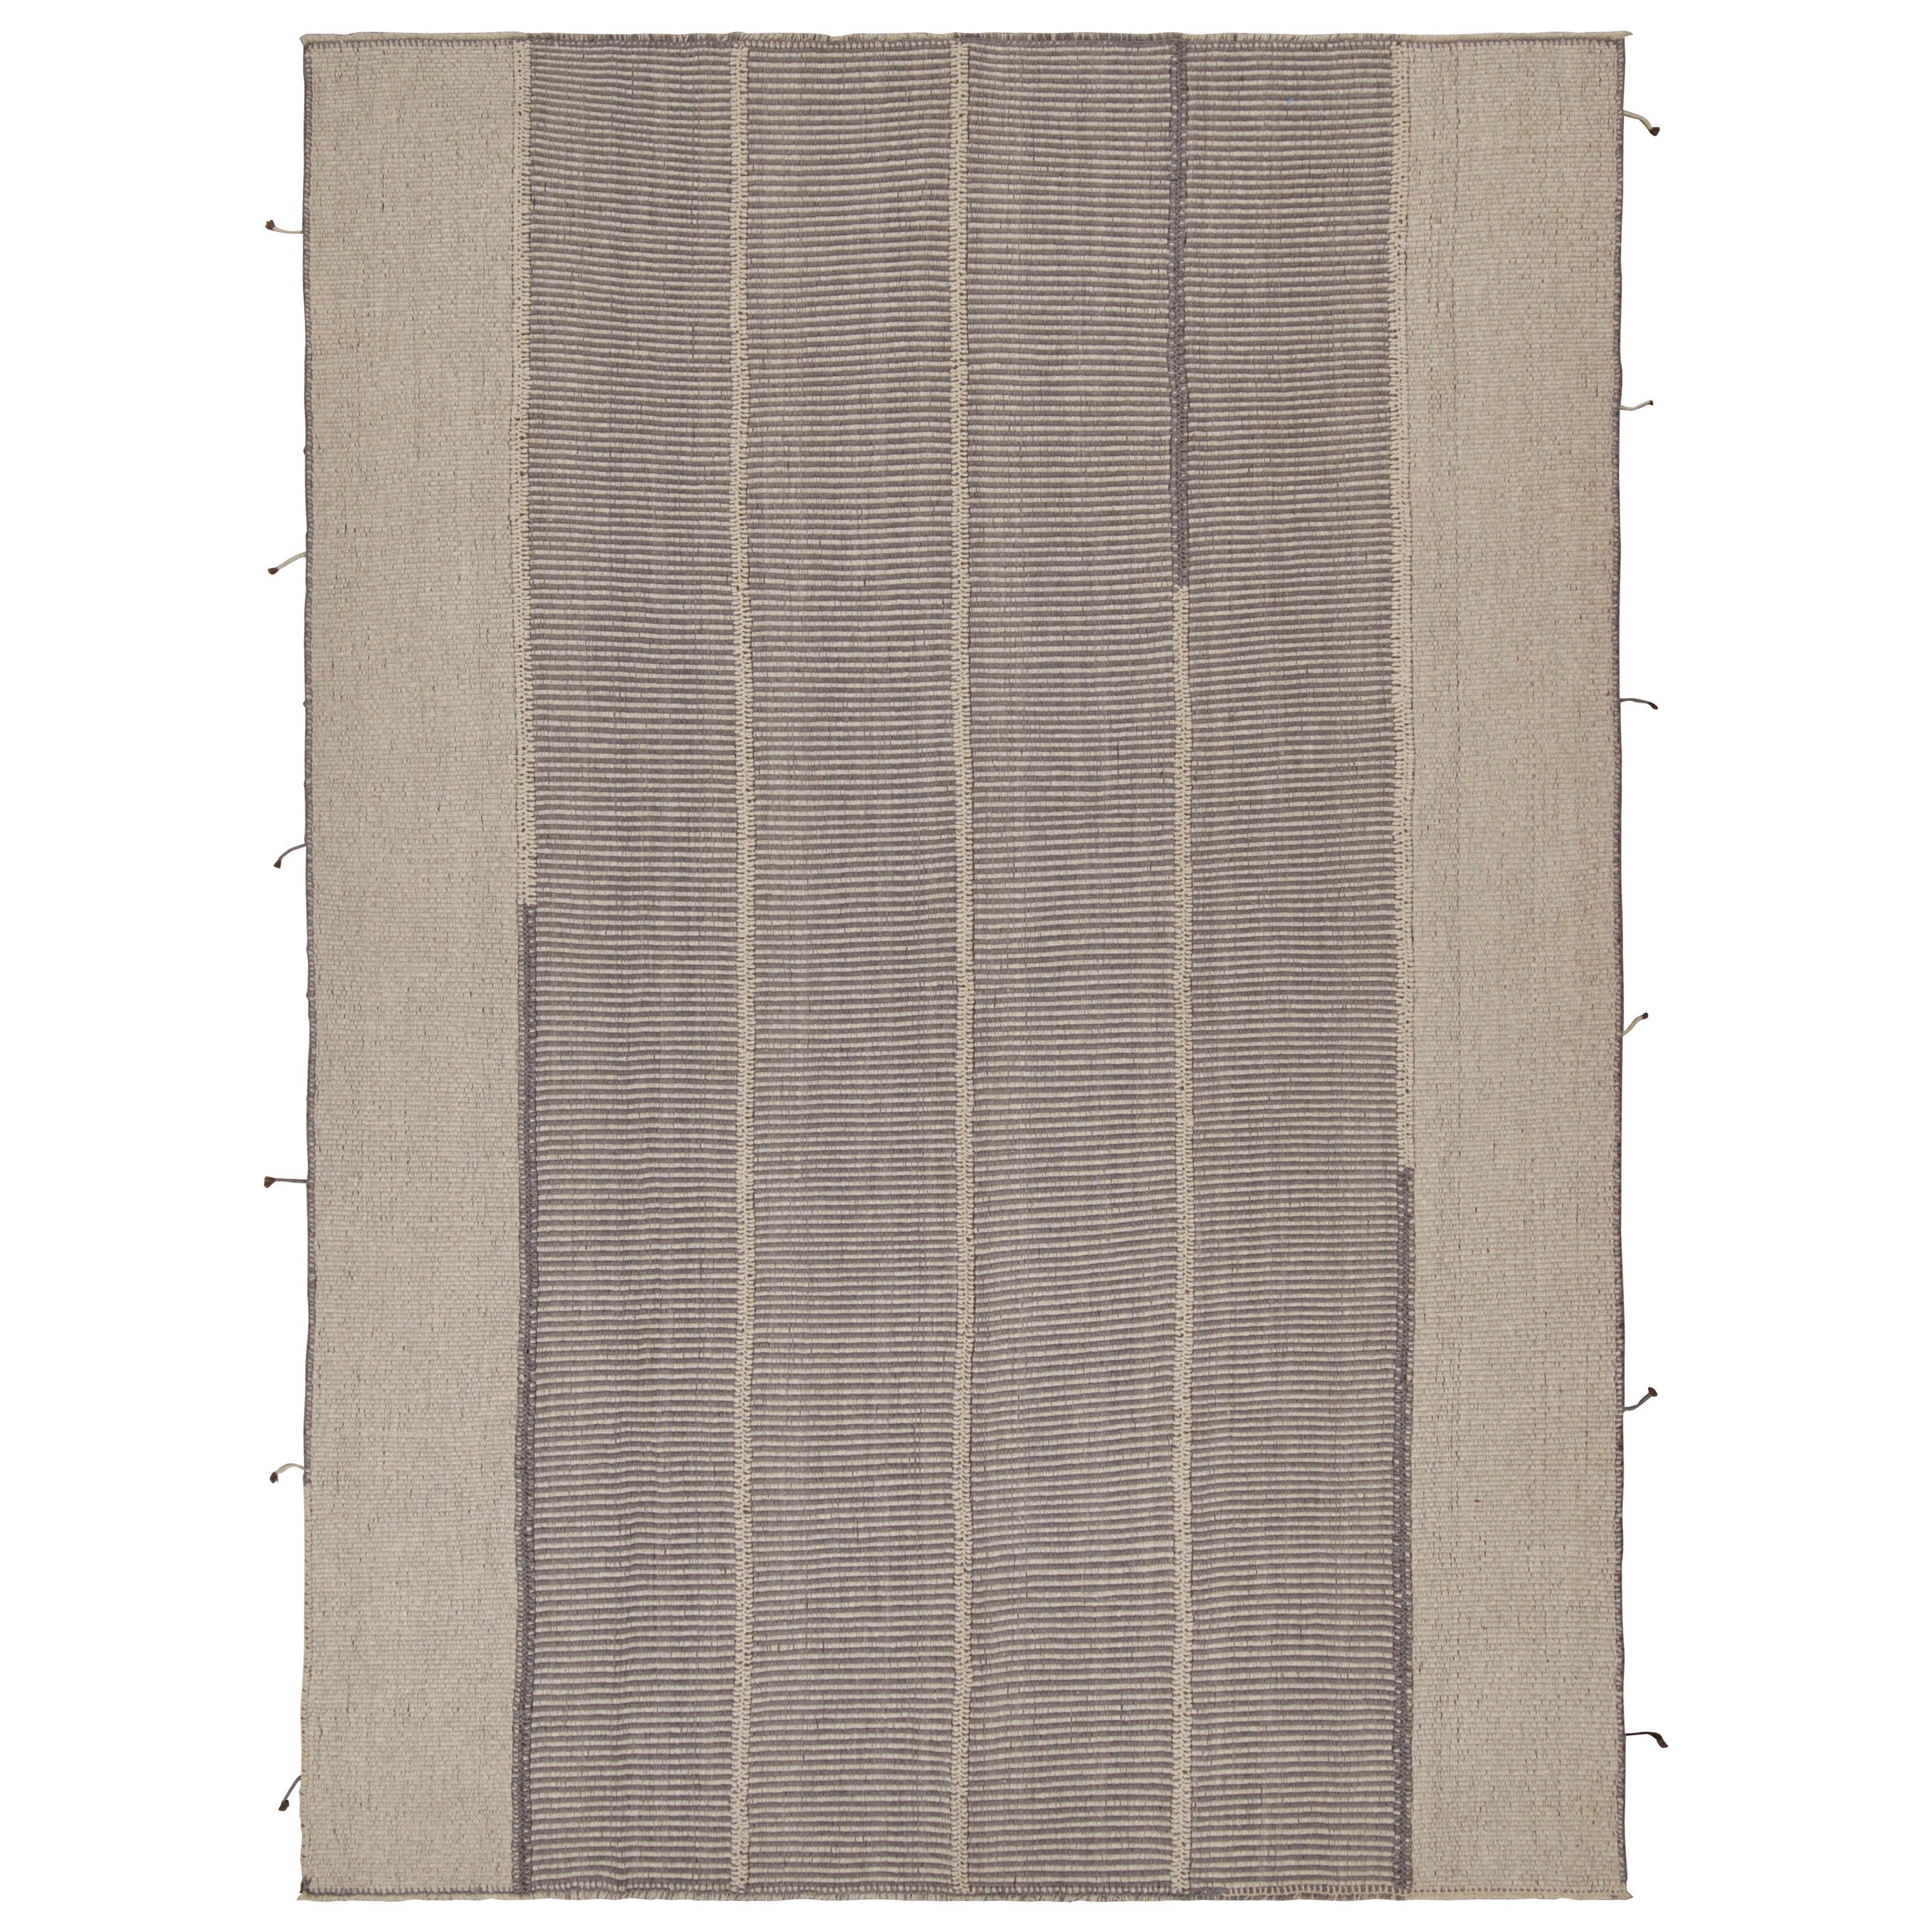 Rug & Kilim’s Contemporary Kilim in Gray and Beige with Stripes & Brown Accents For Sale